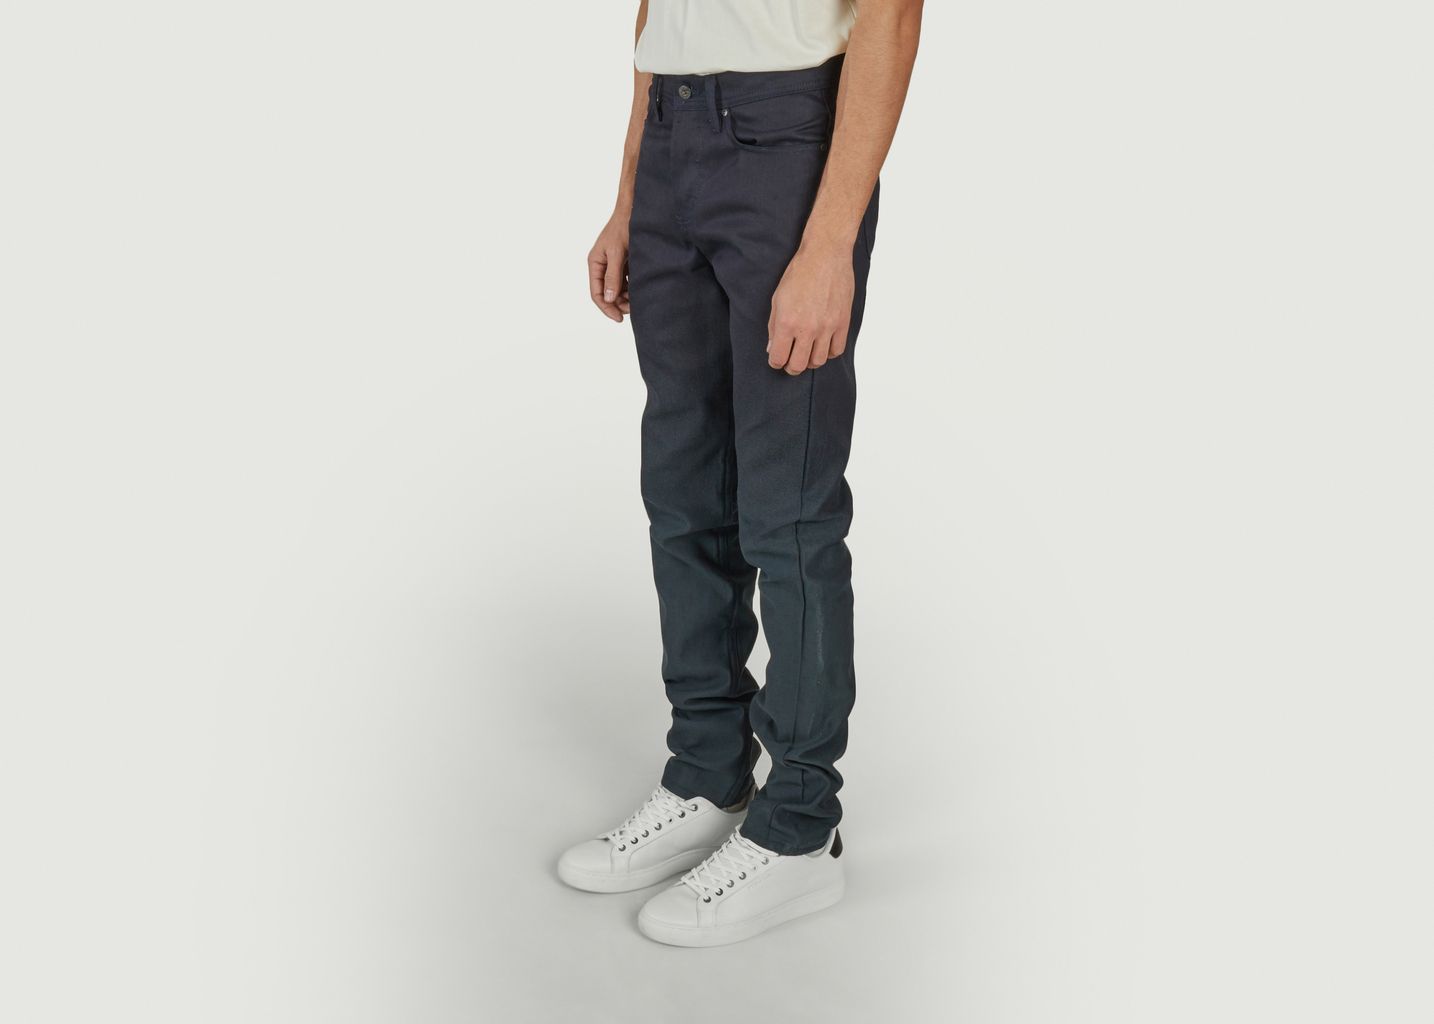 Jean Weird Guy Gradient Denim - Naked and Famous